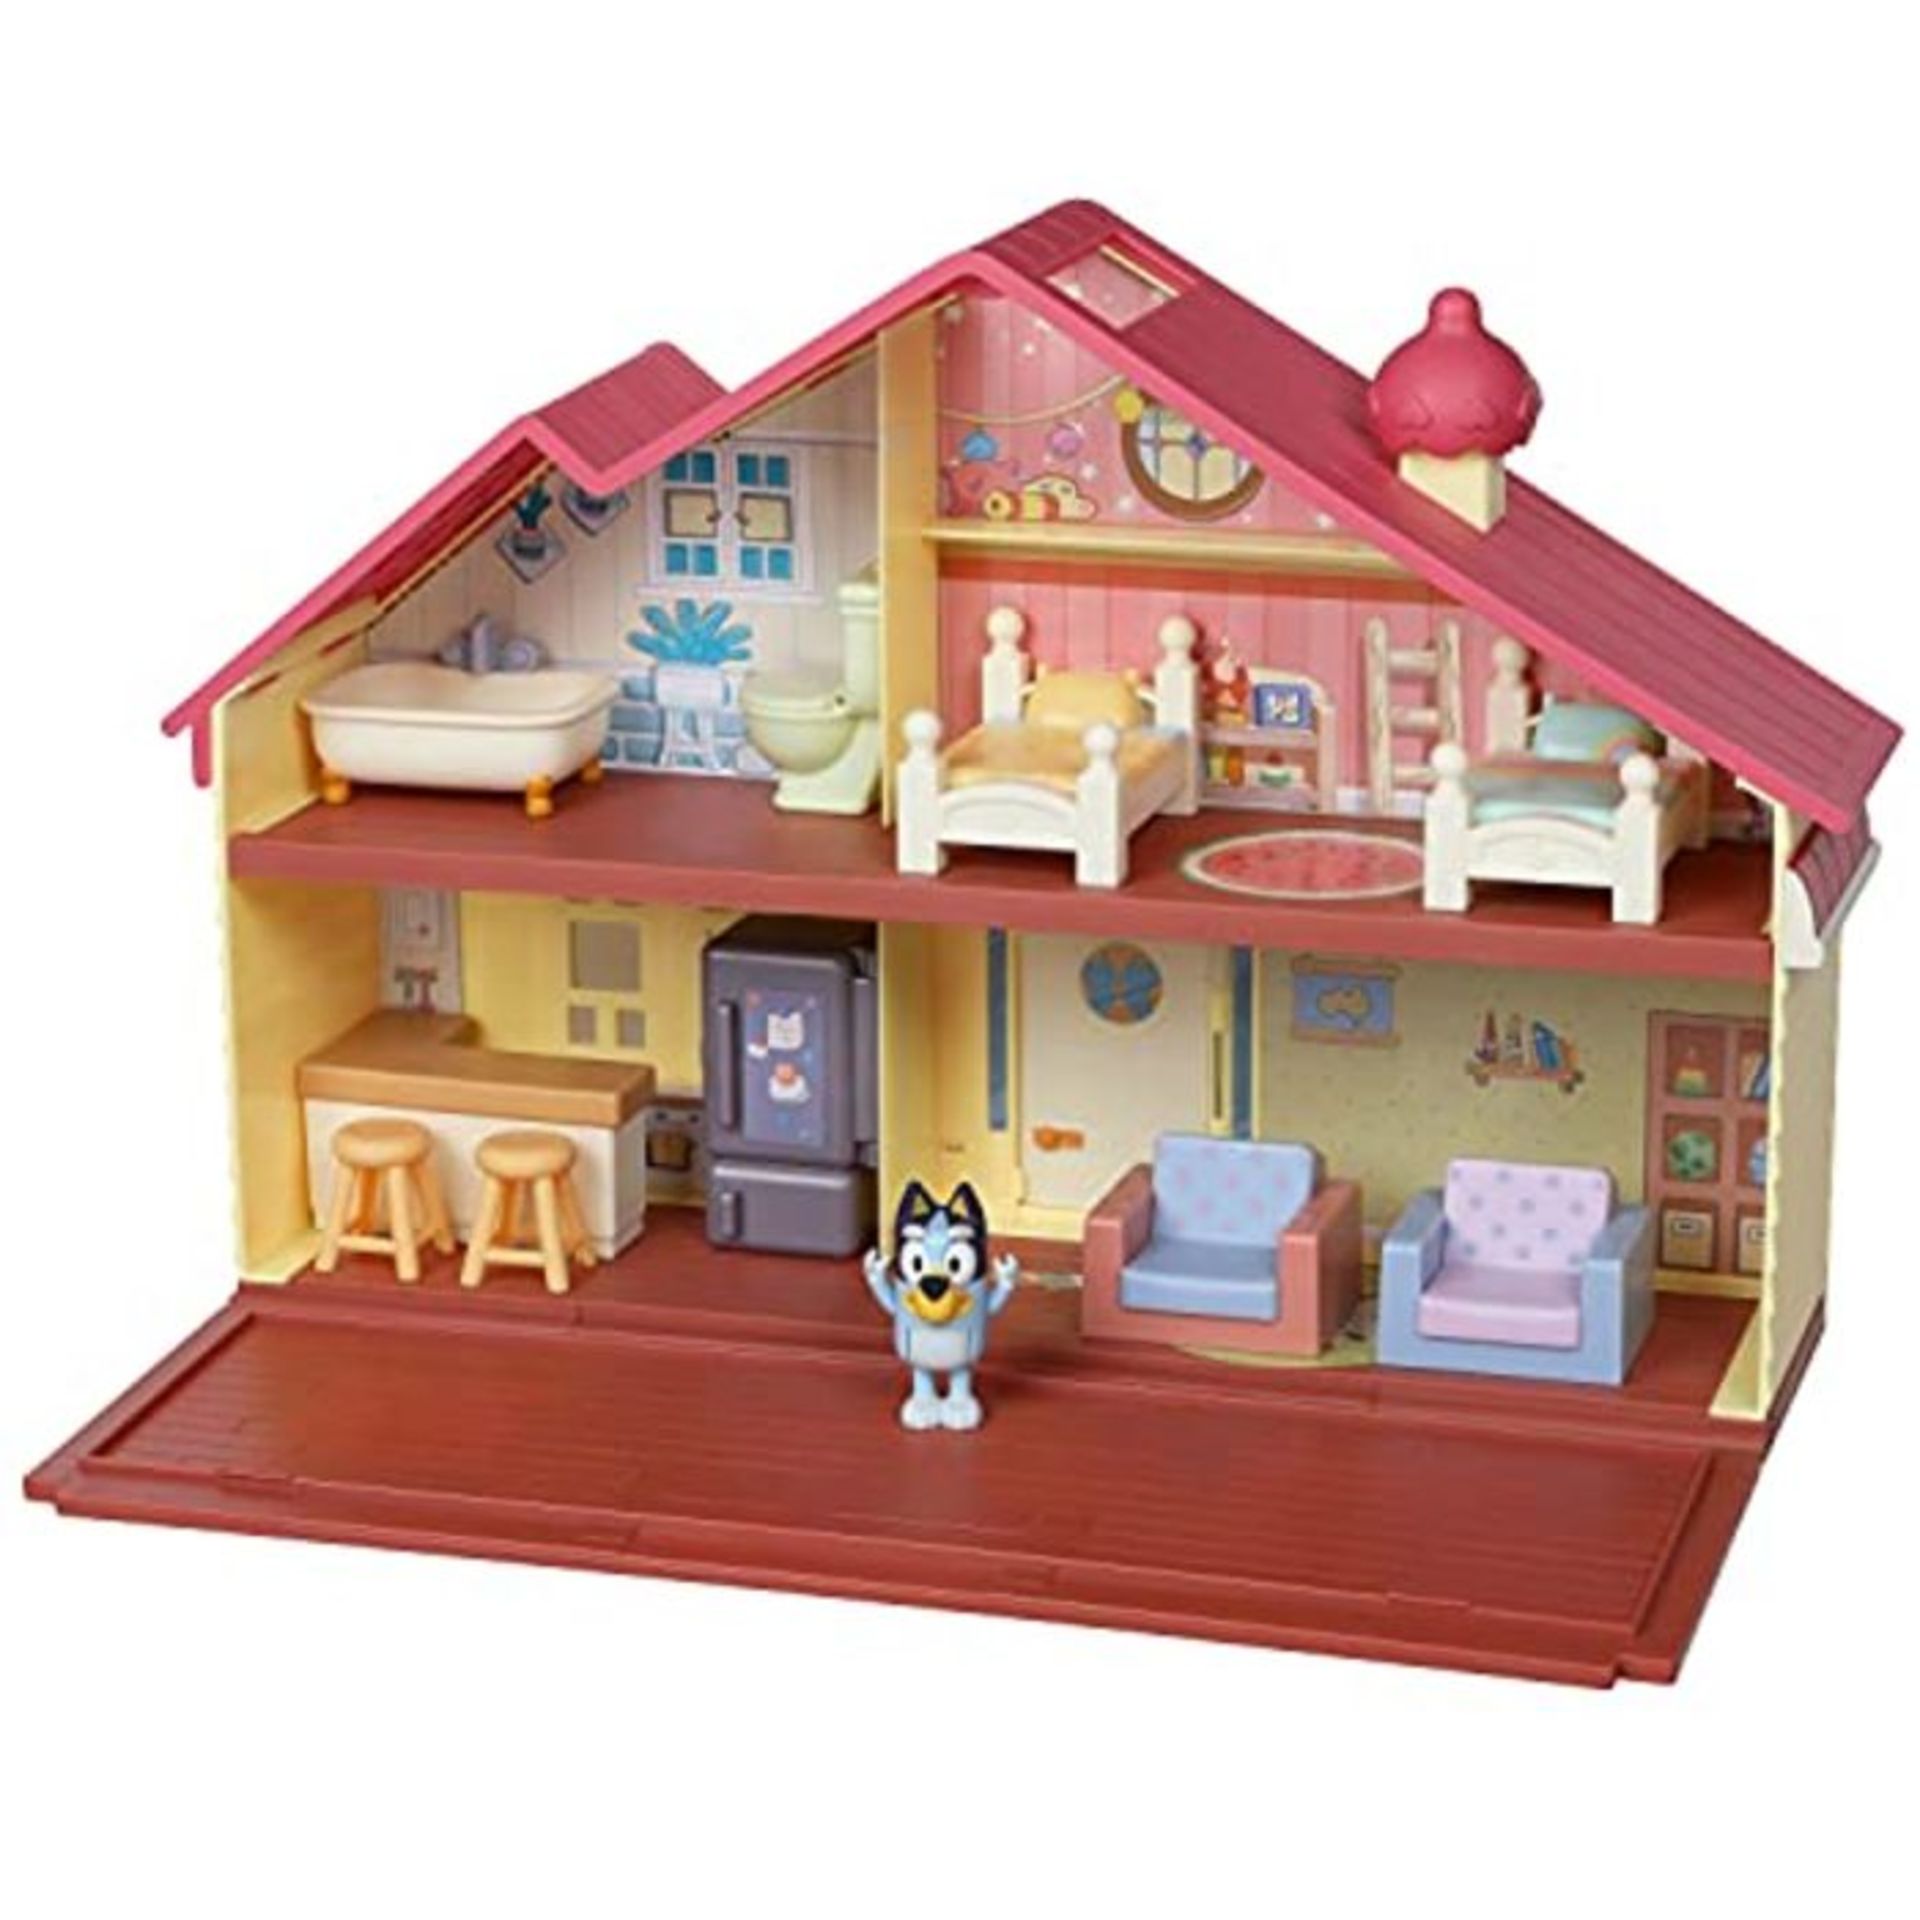 Bluey Heeler Family Home Play Set: 1 Official Collectable Bluey Action Figure, Large P